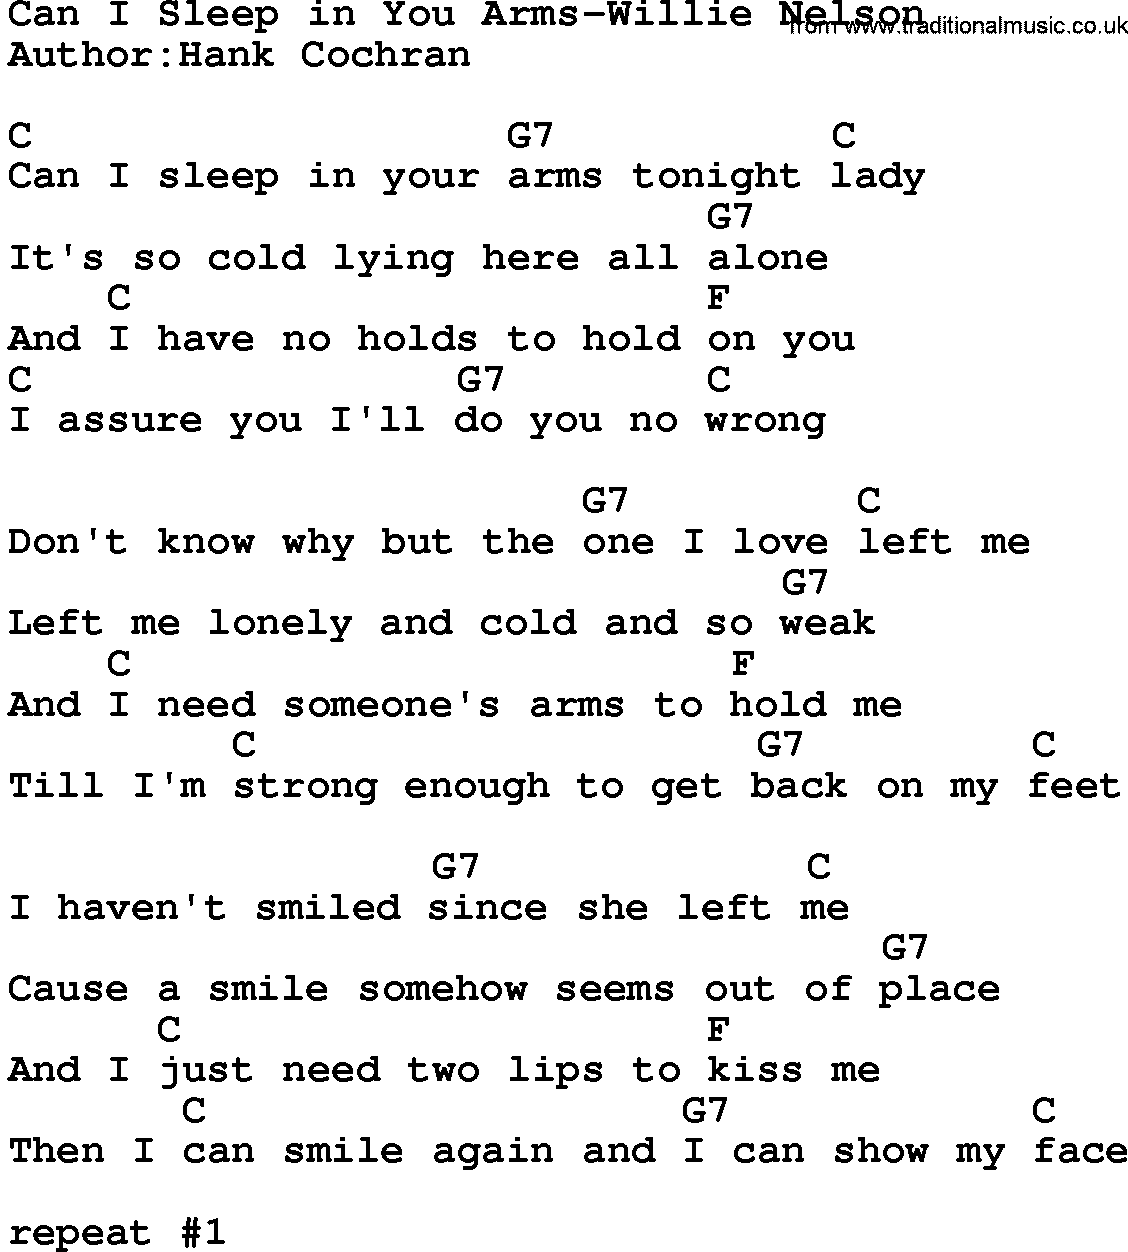 Country music song: Can I Sleep In You Arms-Willie Nelson lyrics and chords